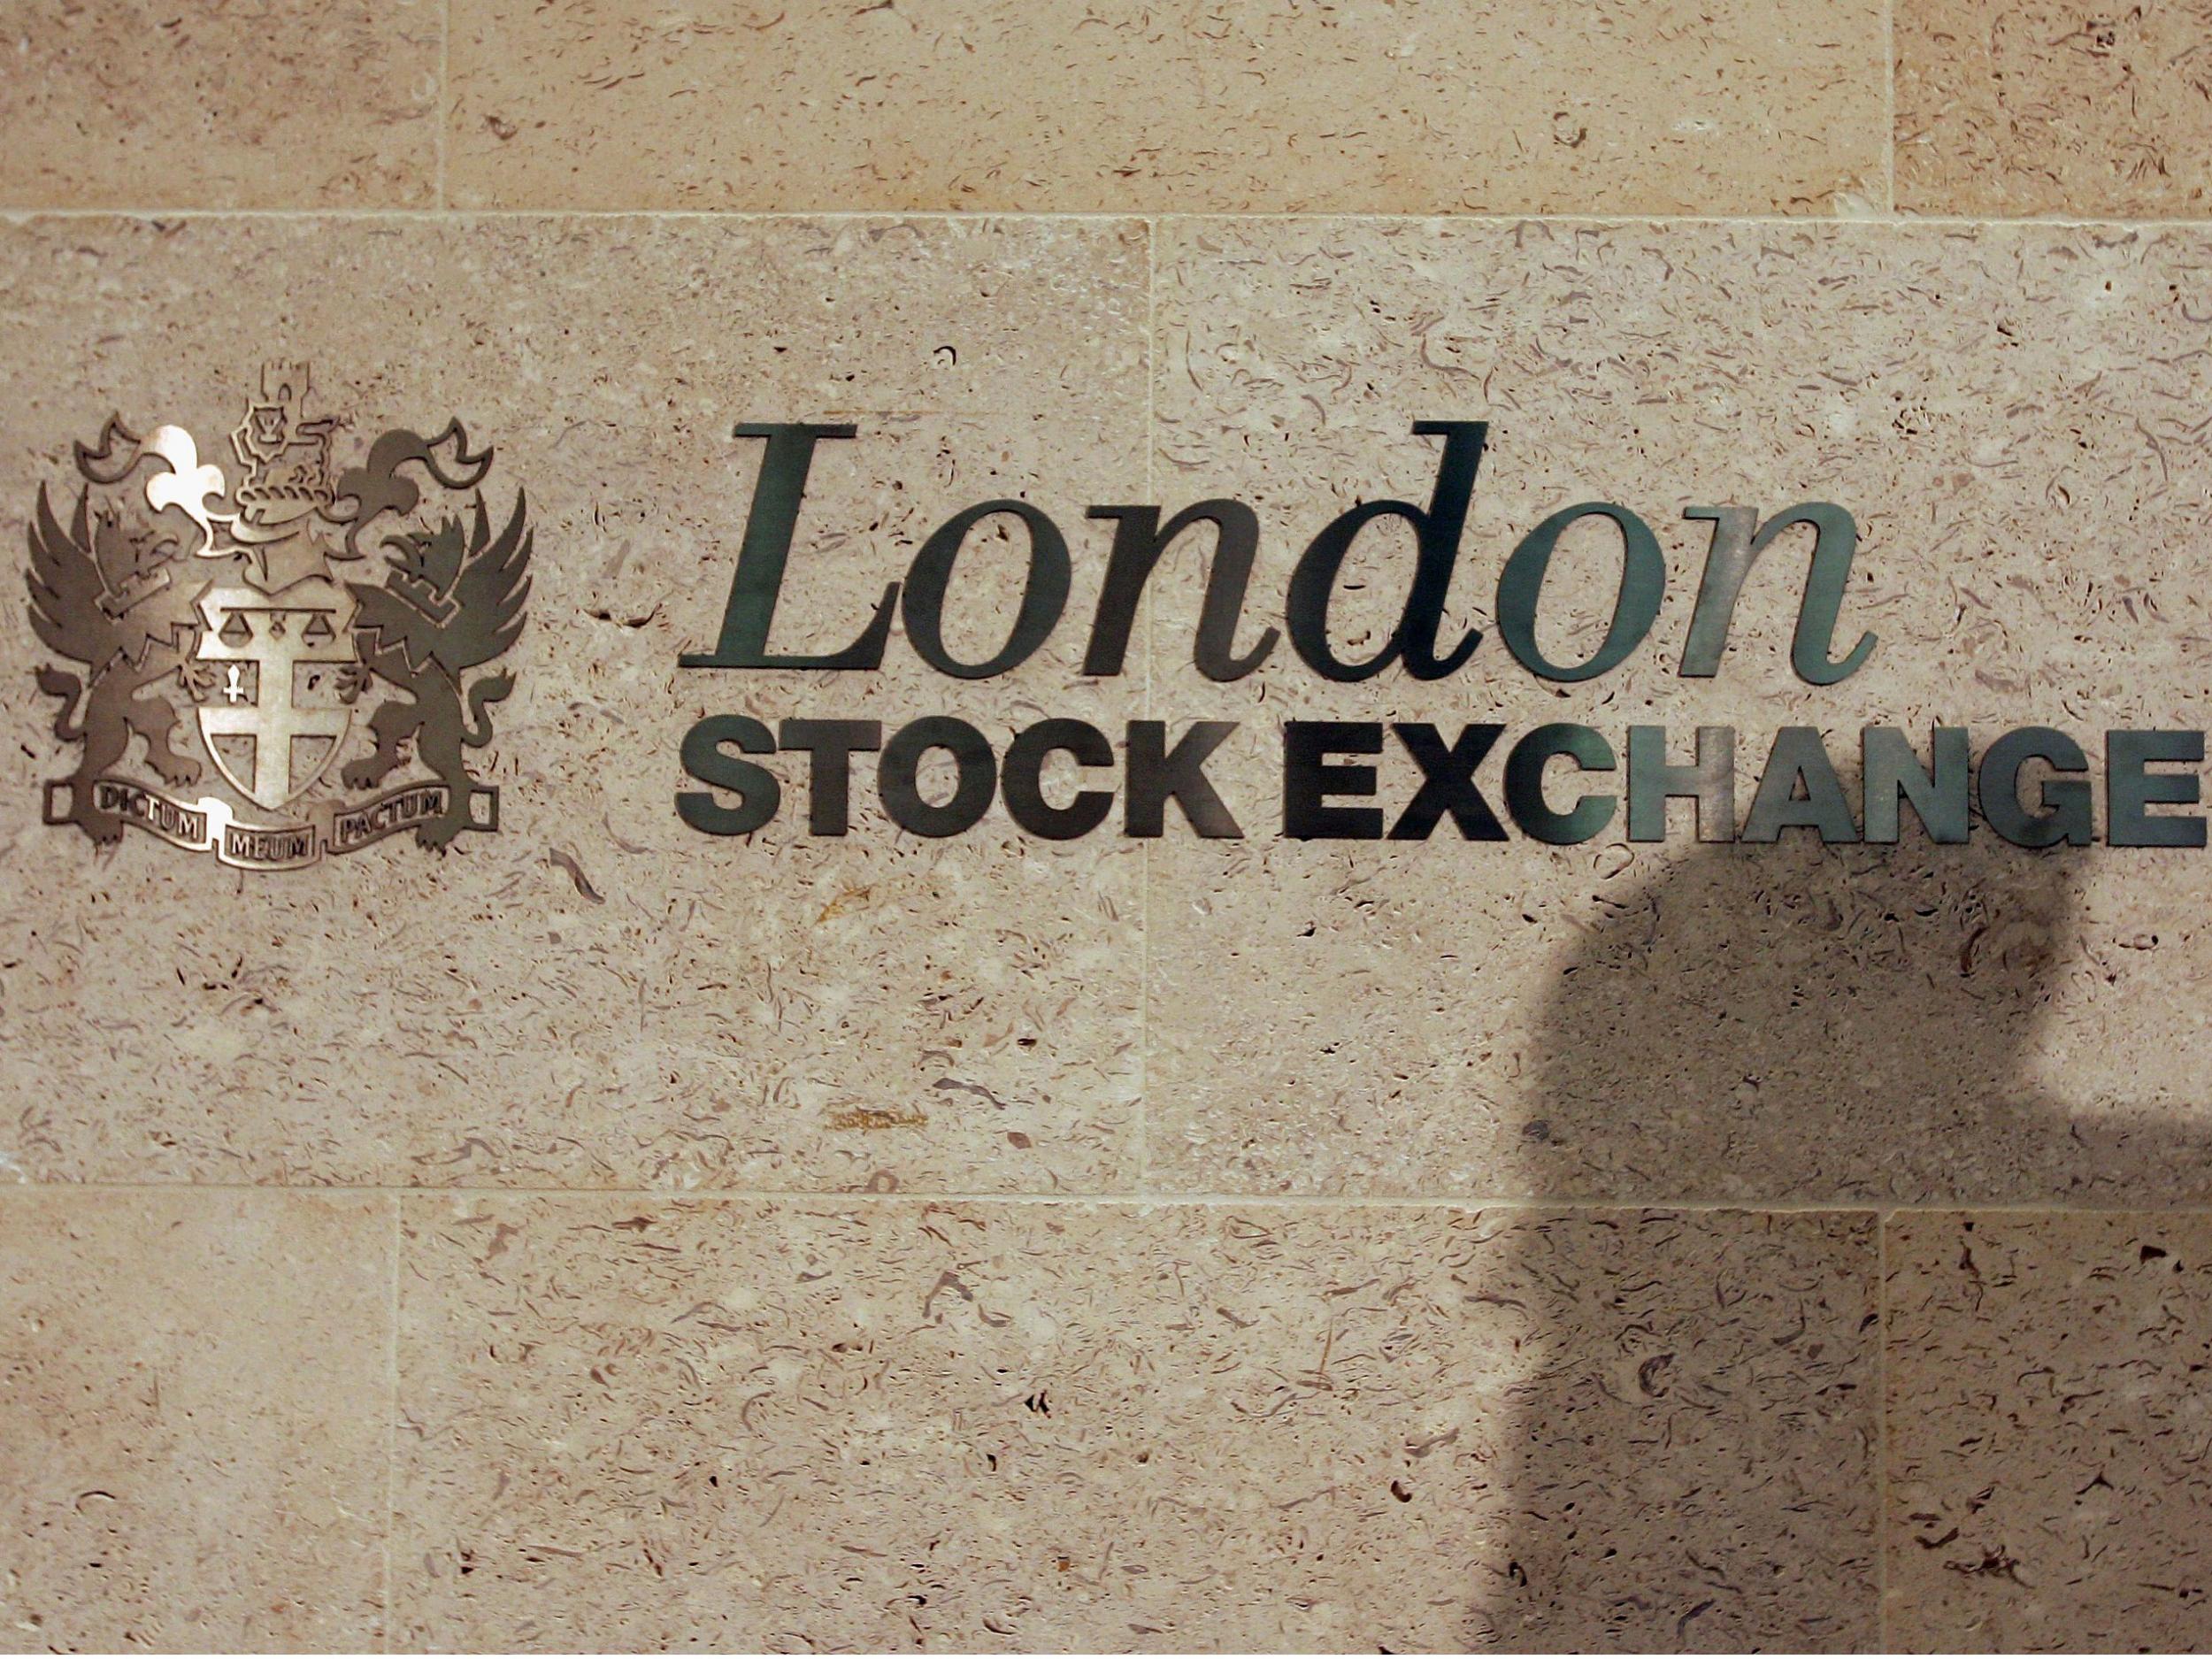 ICE believes LSE shareholders could be persuaded by a higher offer